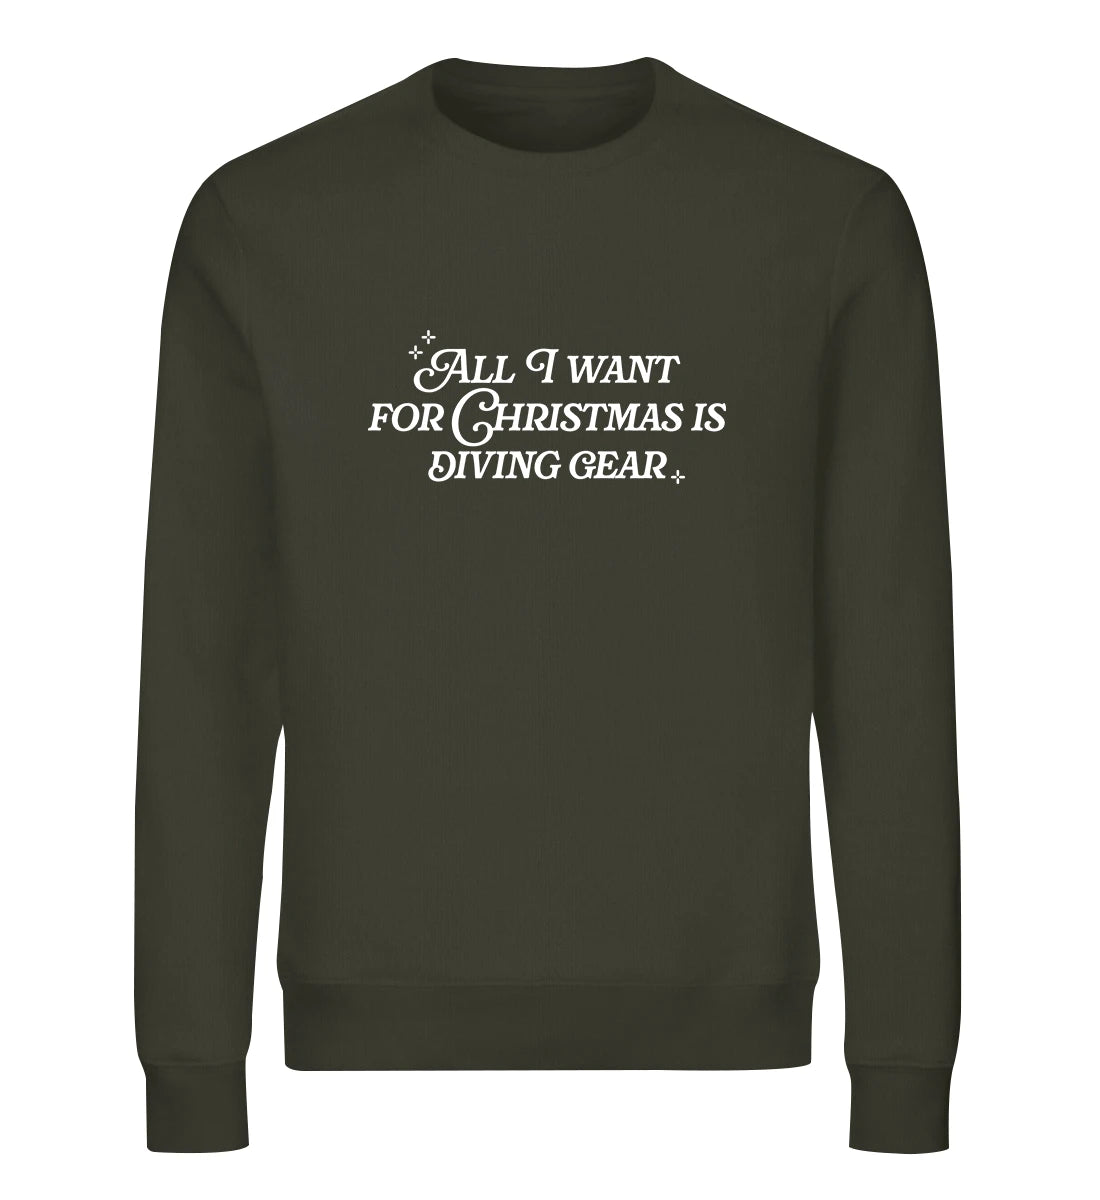 All I want for Christmas - Bio Sweater